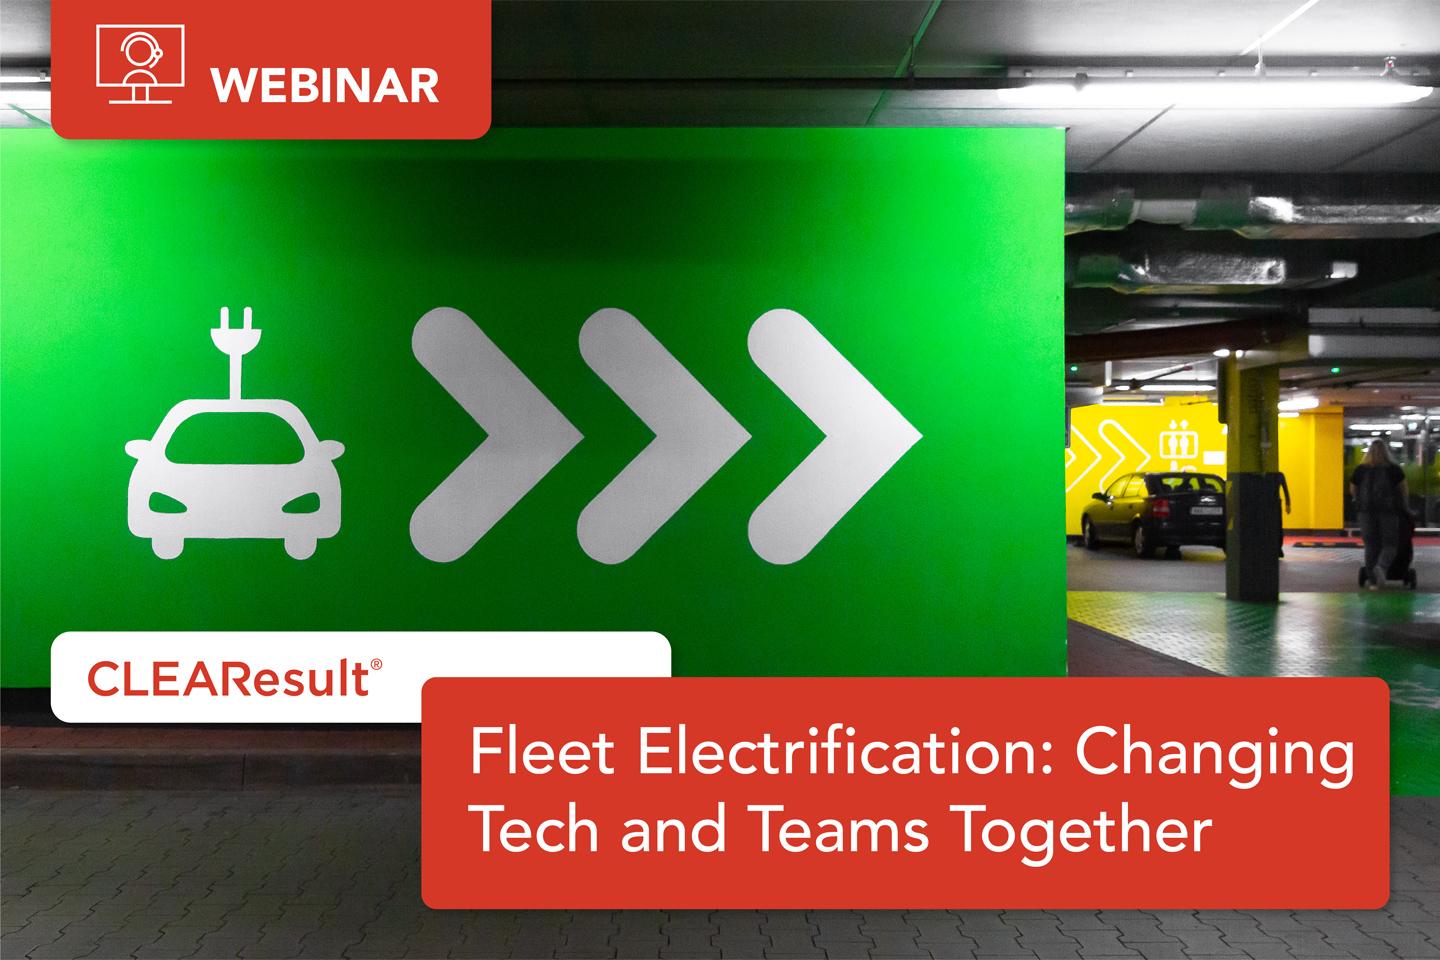 Fleet Electrification: Changing Tech and Teams Together